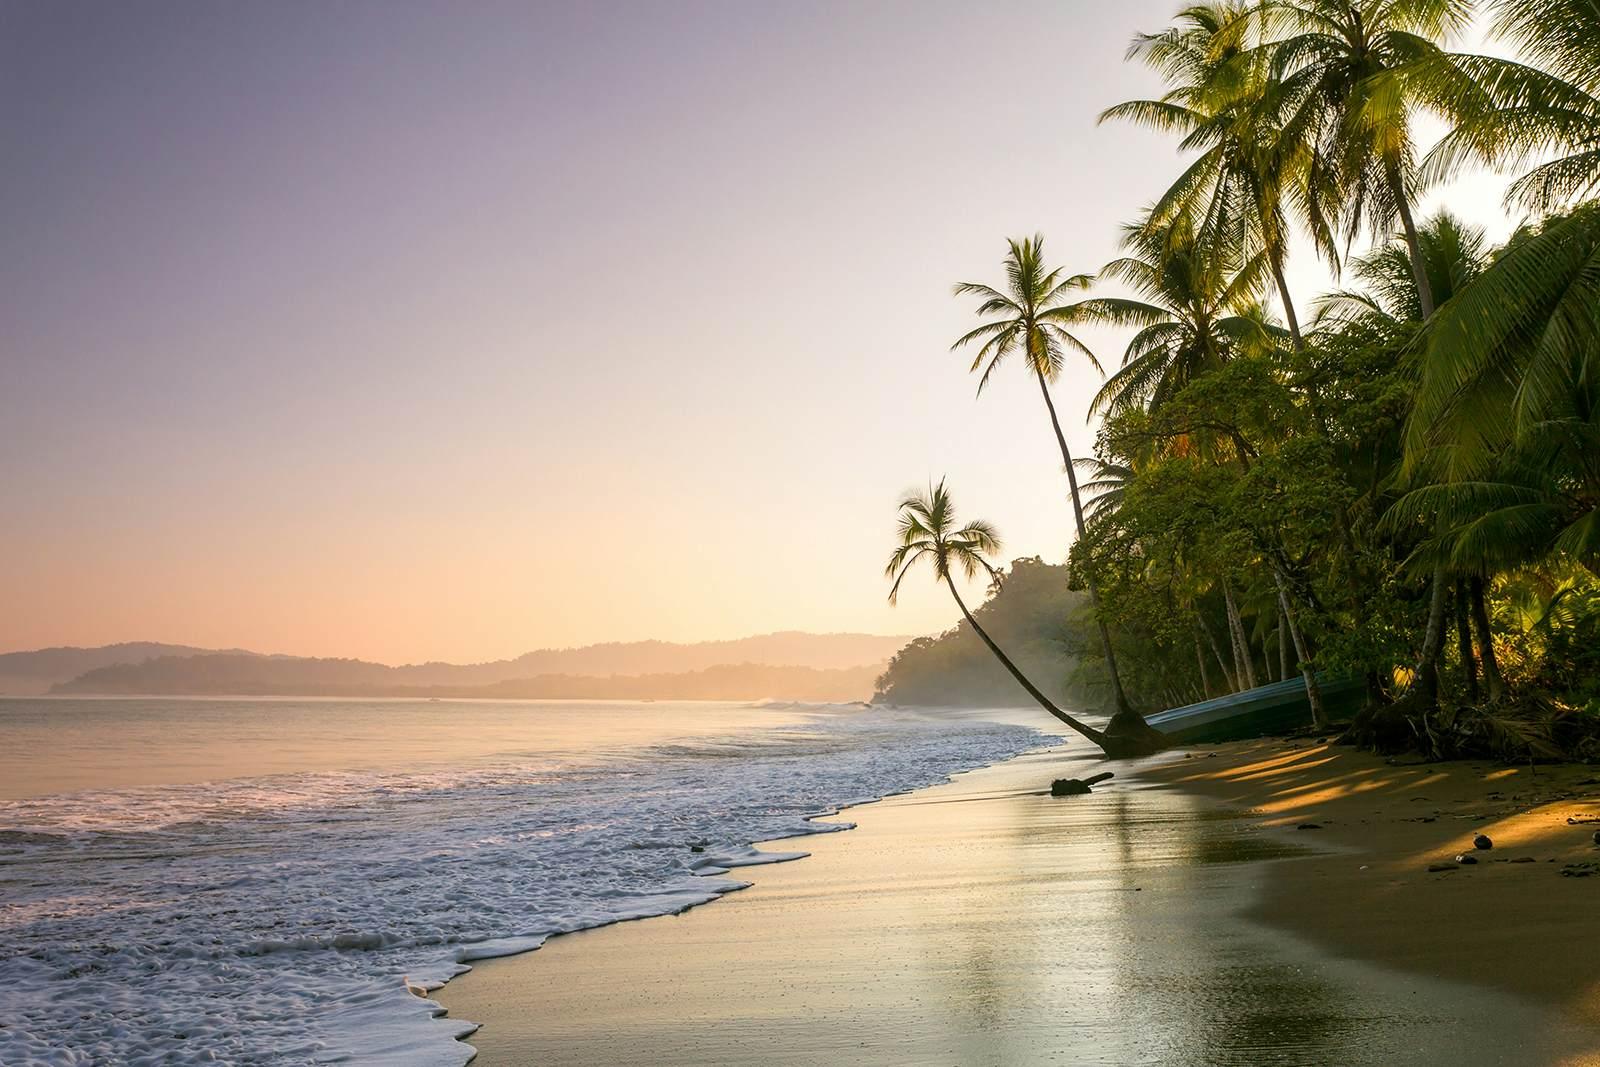 Features - Sunset on palm fringed beach, Costa Rica